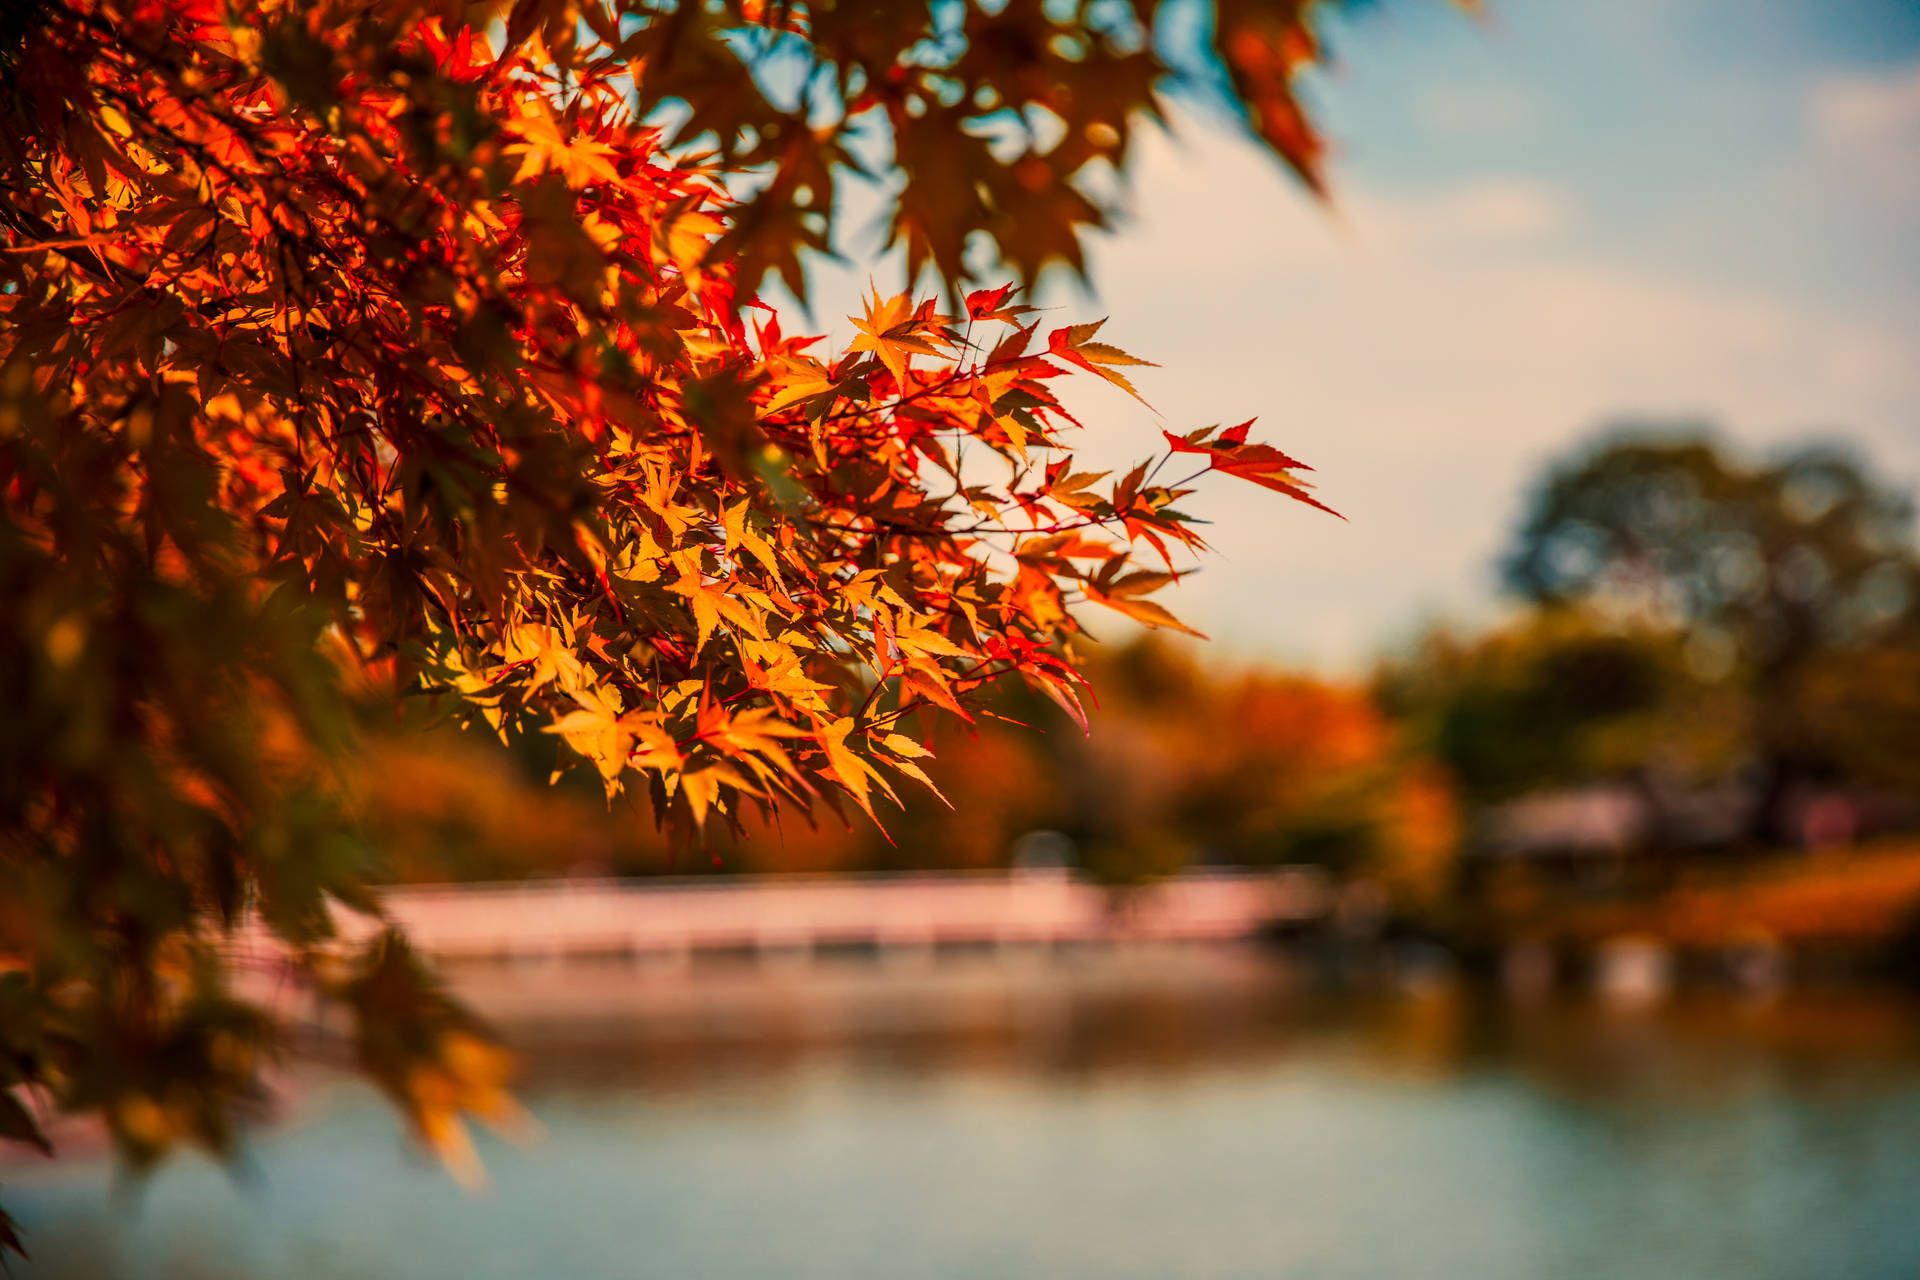 A leafy tree with red leaves overlooking the water - Fall